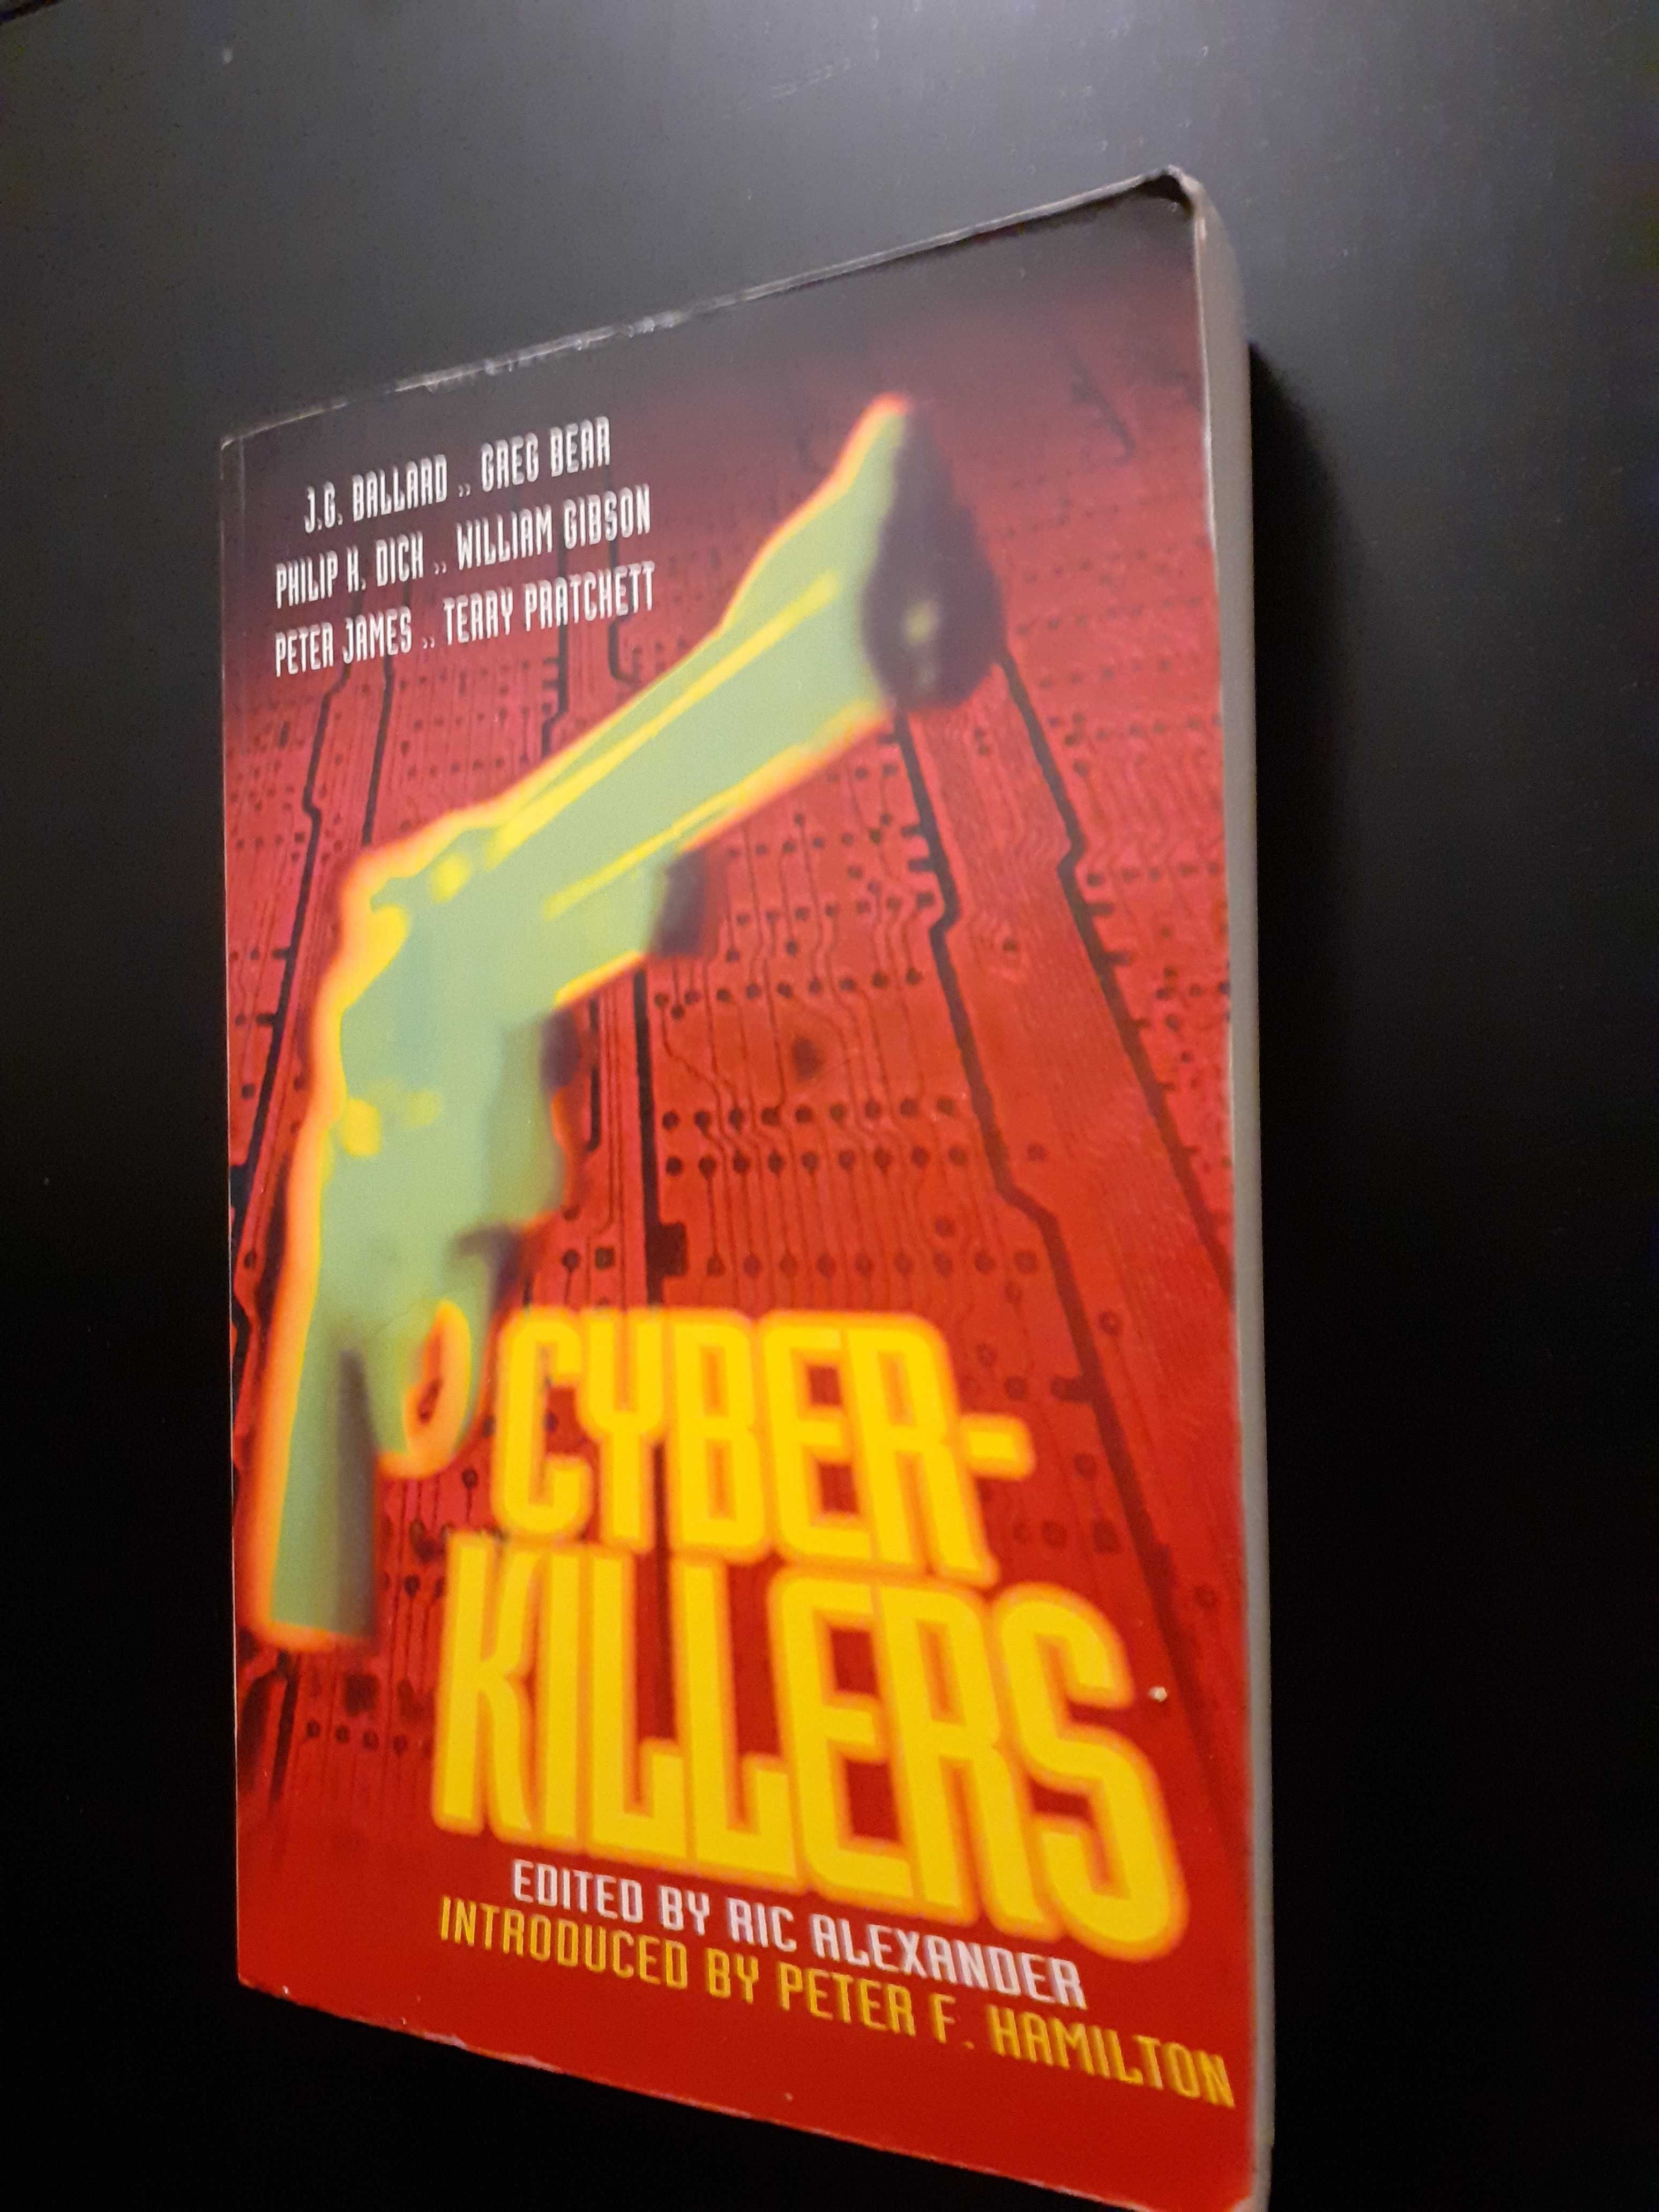 Ric Alexander (editor), Cyber-Killers - antologie science-fiction